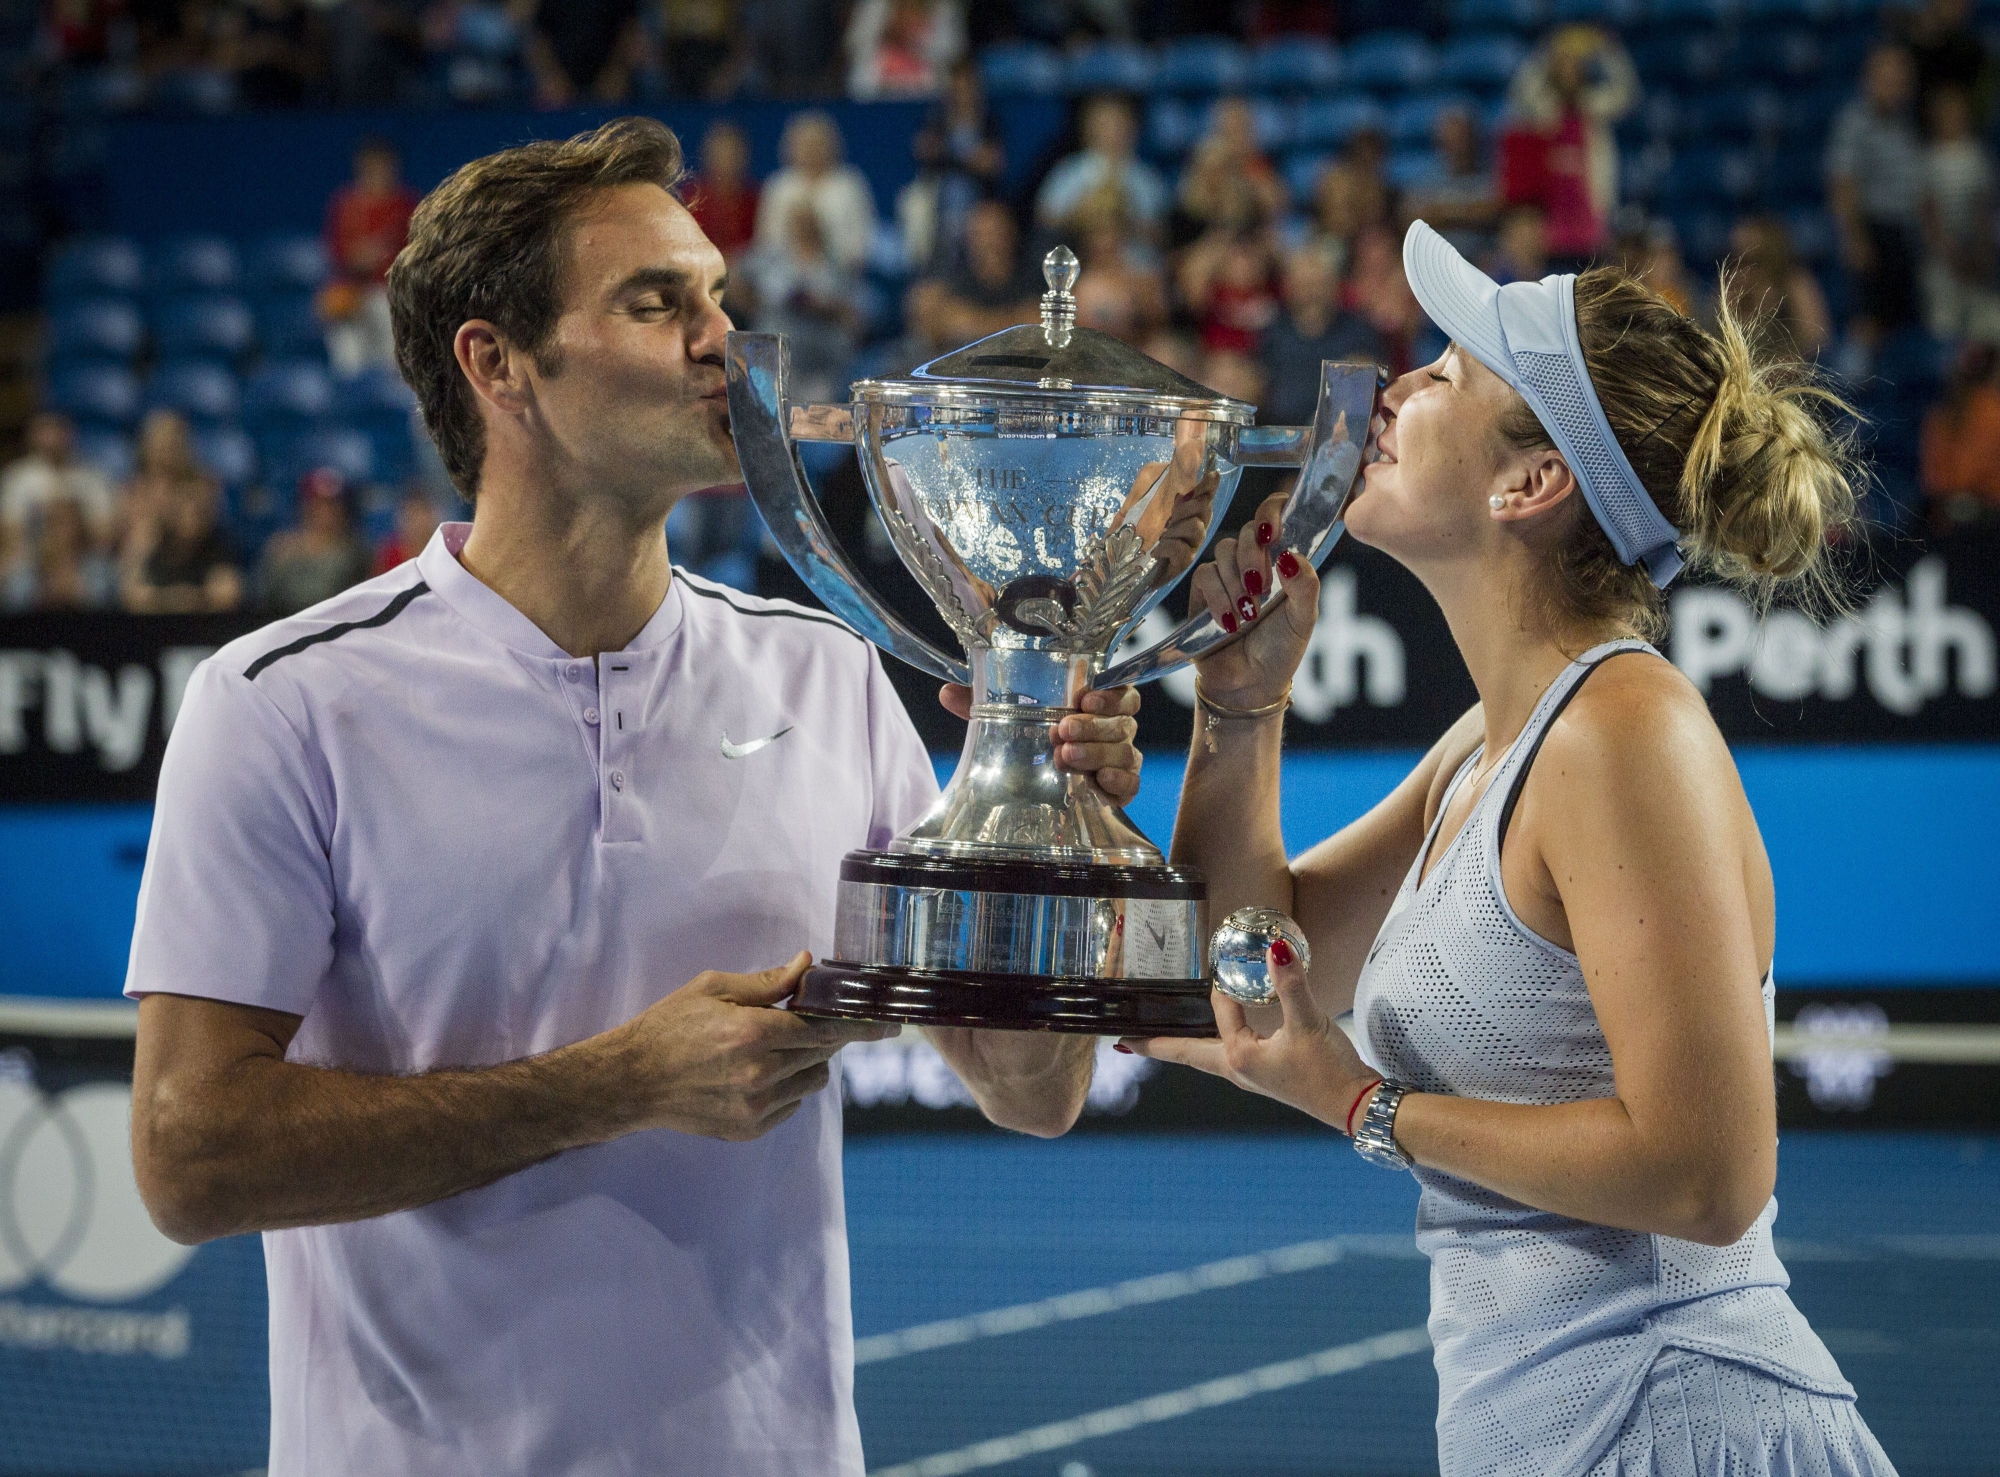 epa06420720 Roger Federer and Belinda Bencic of Switzerland celebrate their finals win with the Hopman Cup after winning on the final day of the Hopman Cup final between Switzerland and Germany at the Perth Arena in Perth, Australia, 06 January 2018.  EPA/TONY MCDONOUGH AUSTRALIA AND NEW ZEALAND OUT  EDITORIAL USE ONLY  EDITORIAL USE ONLY  EDITORIAL USE ONLY  EDITORIAL USE ONLY  EDITORIAL USE ONLY  EDITORIAL USE ONLY AUSTRALIA TENNIS HOPMAN CUP